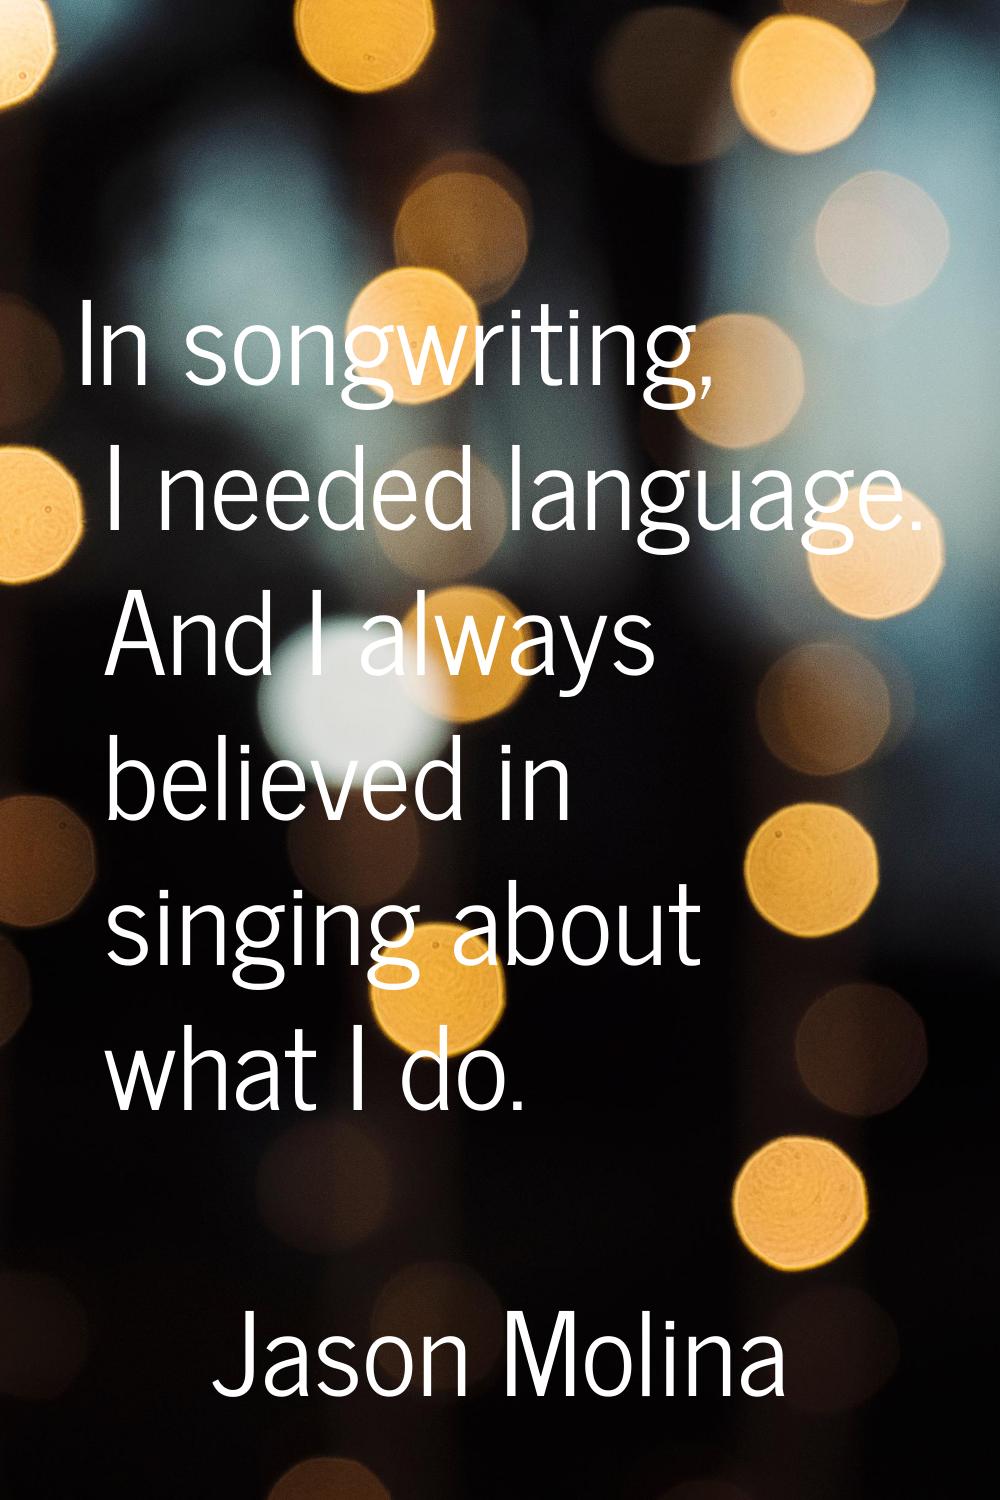 In songwriting, I needed language. And I always believed in singing about what I do.